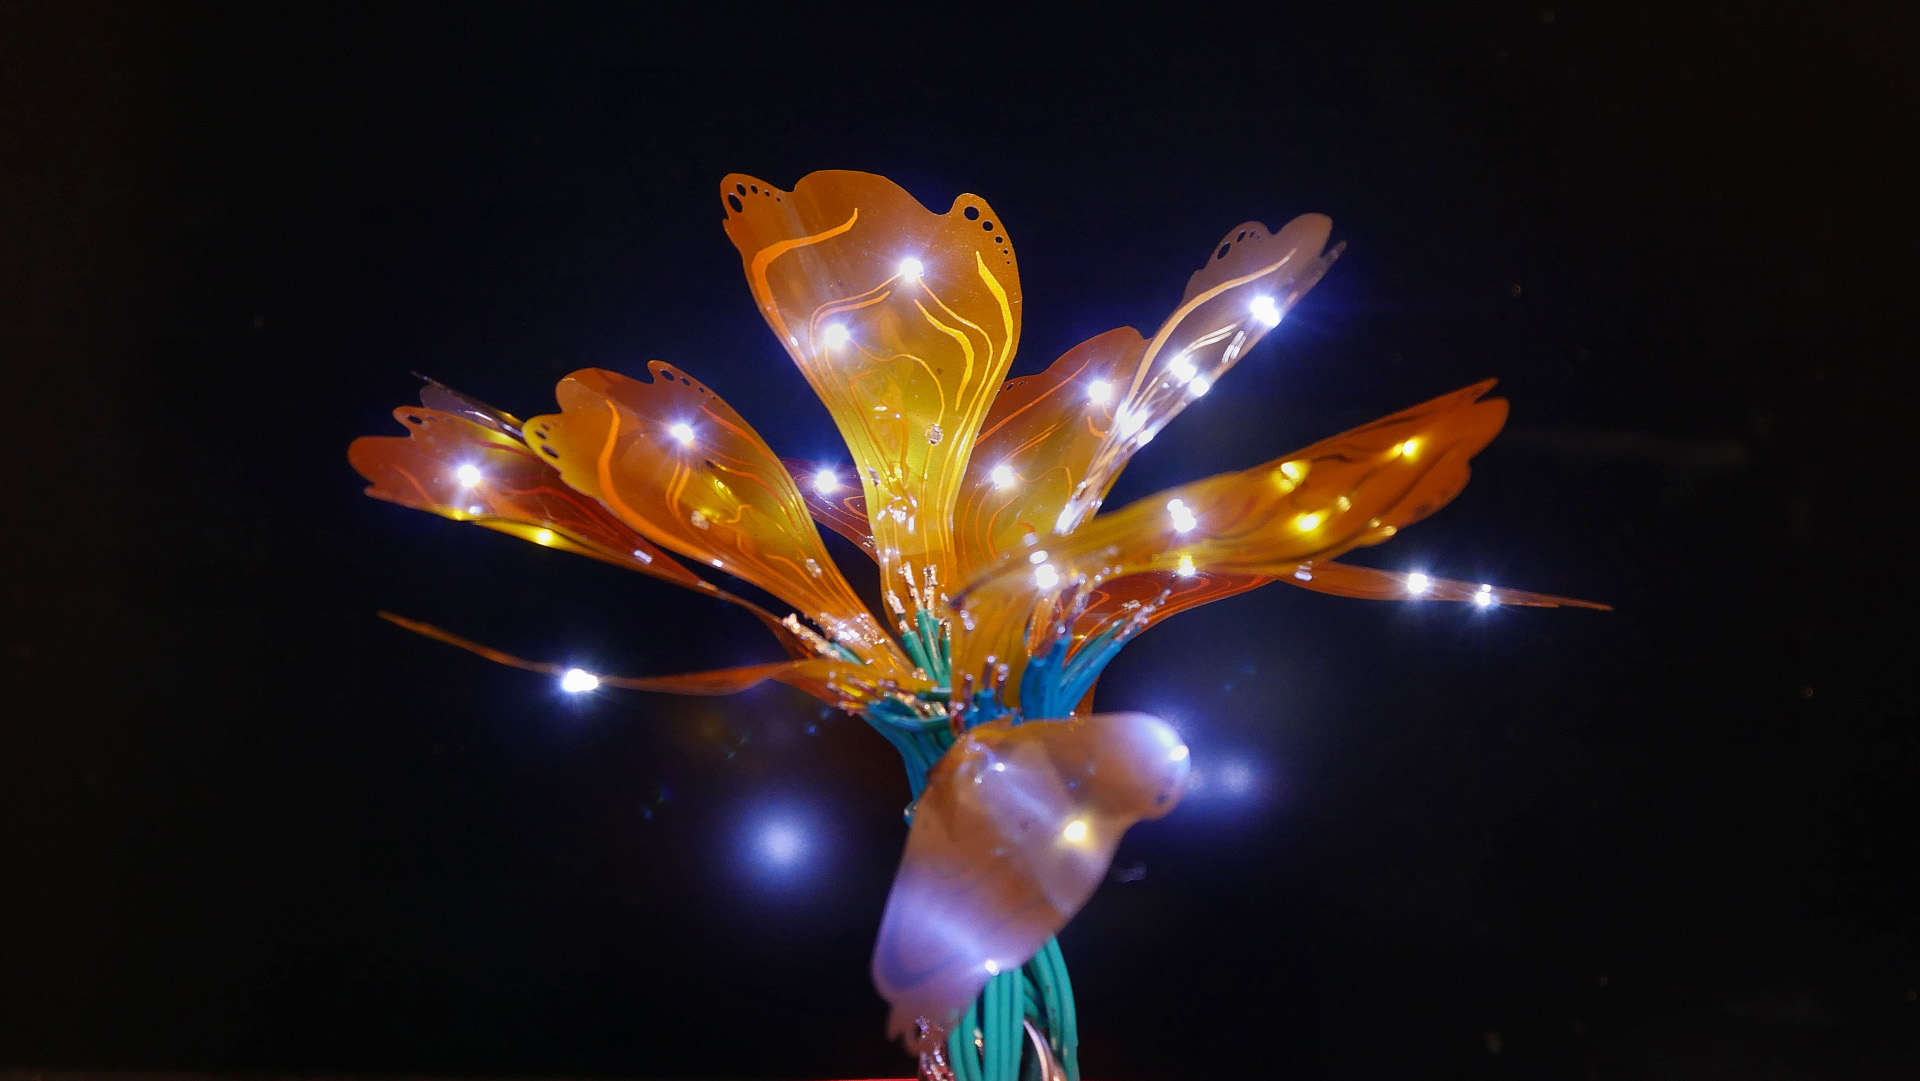 This Illuminated Flower Is A Flexible PCB Sculpture